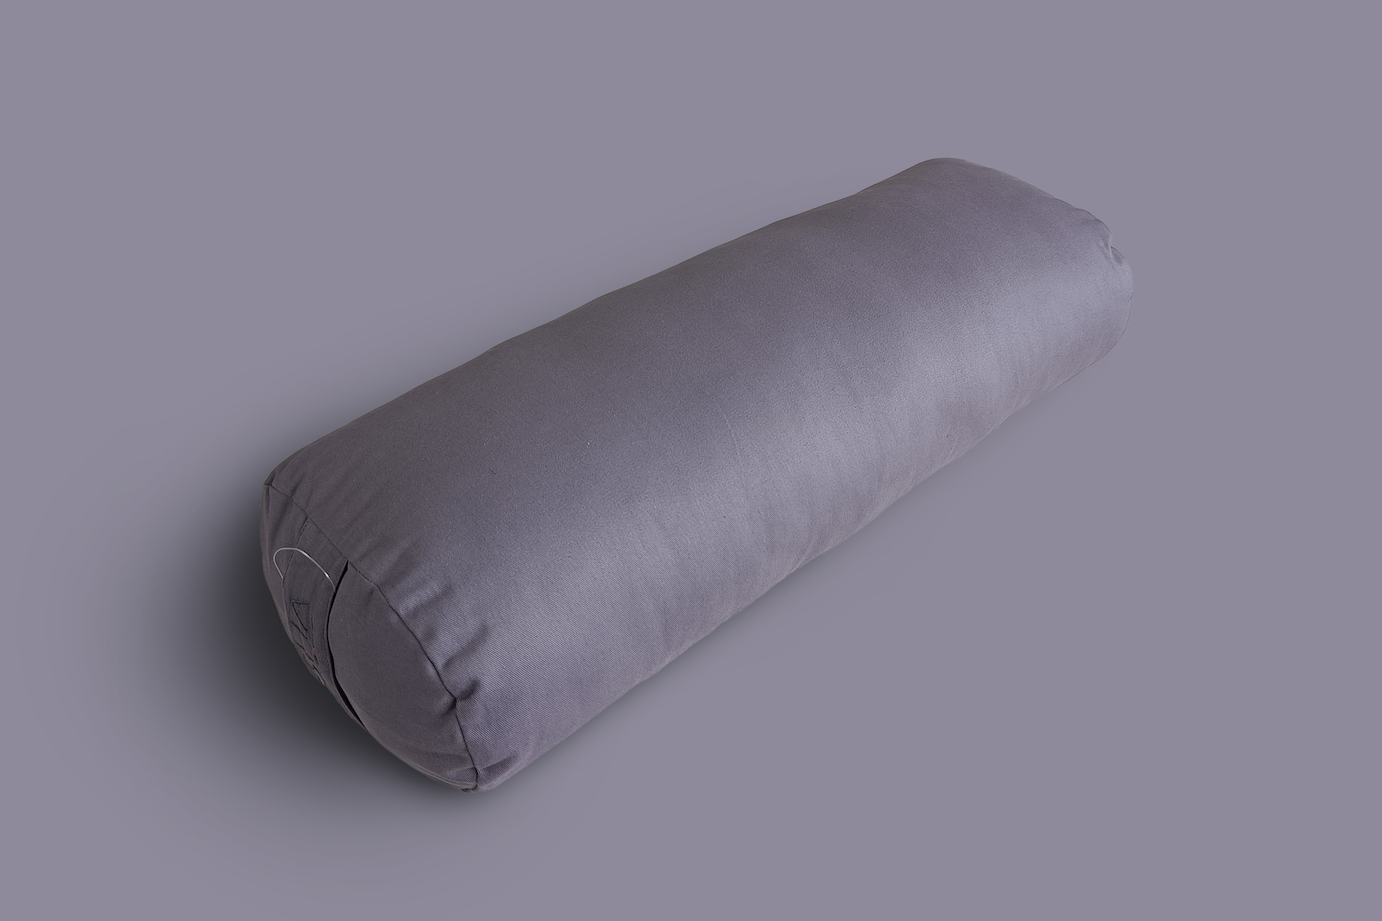 Yoga bolster with cotton cover with soft cushioning for yin yoga restorative yoga relaxation mindfulness meditation in purple colour